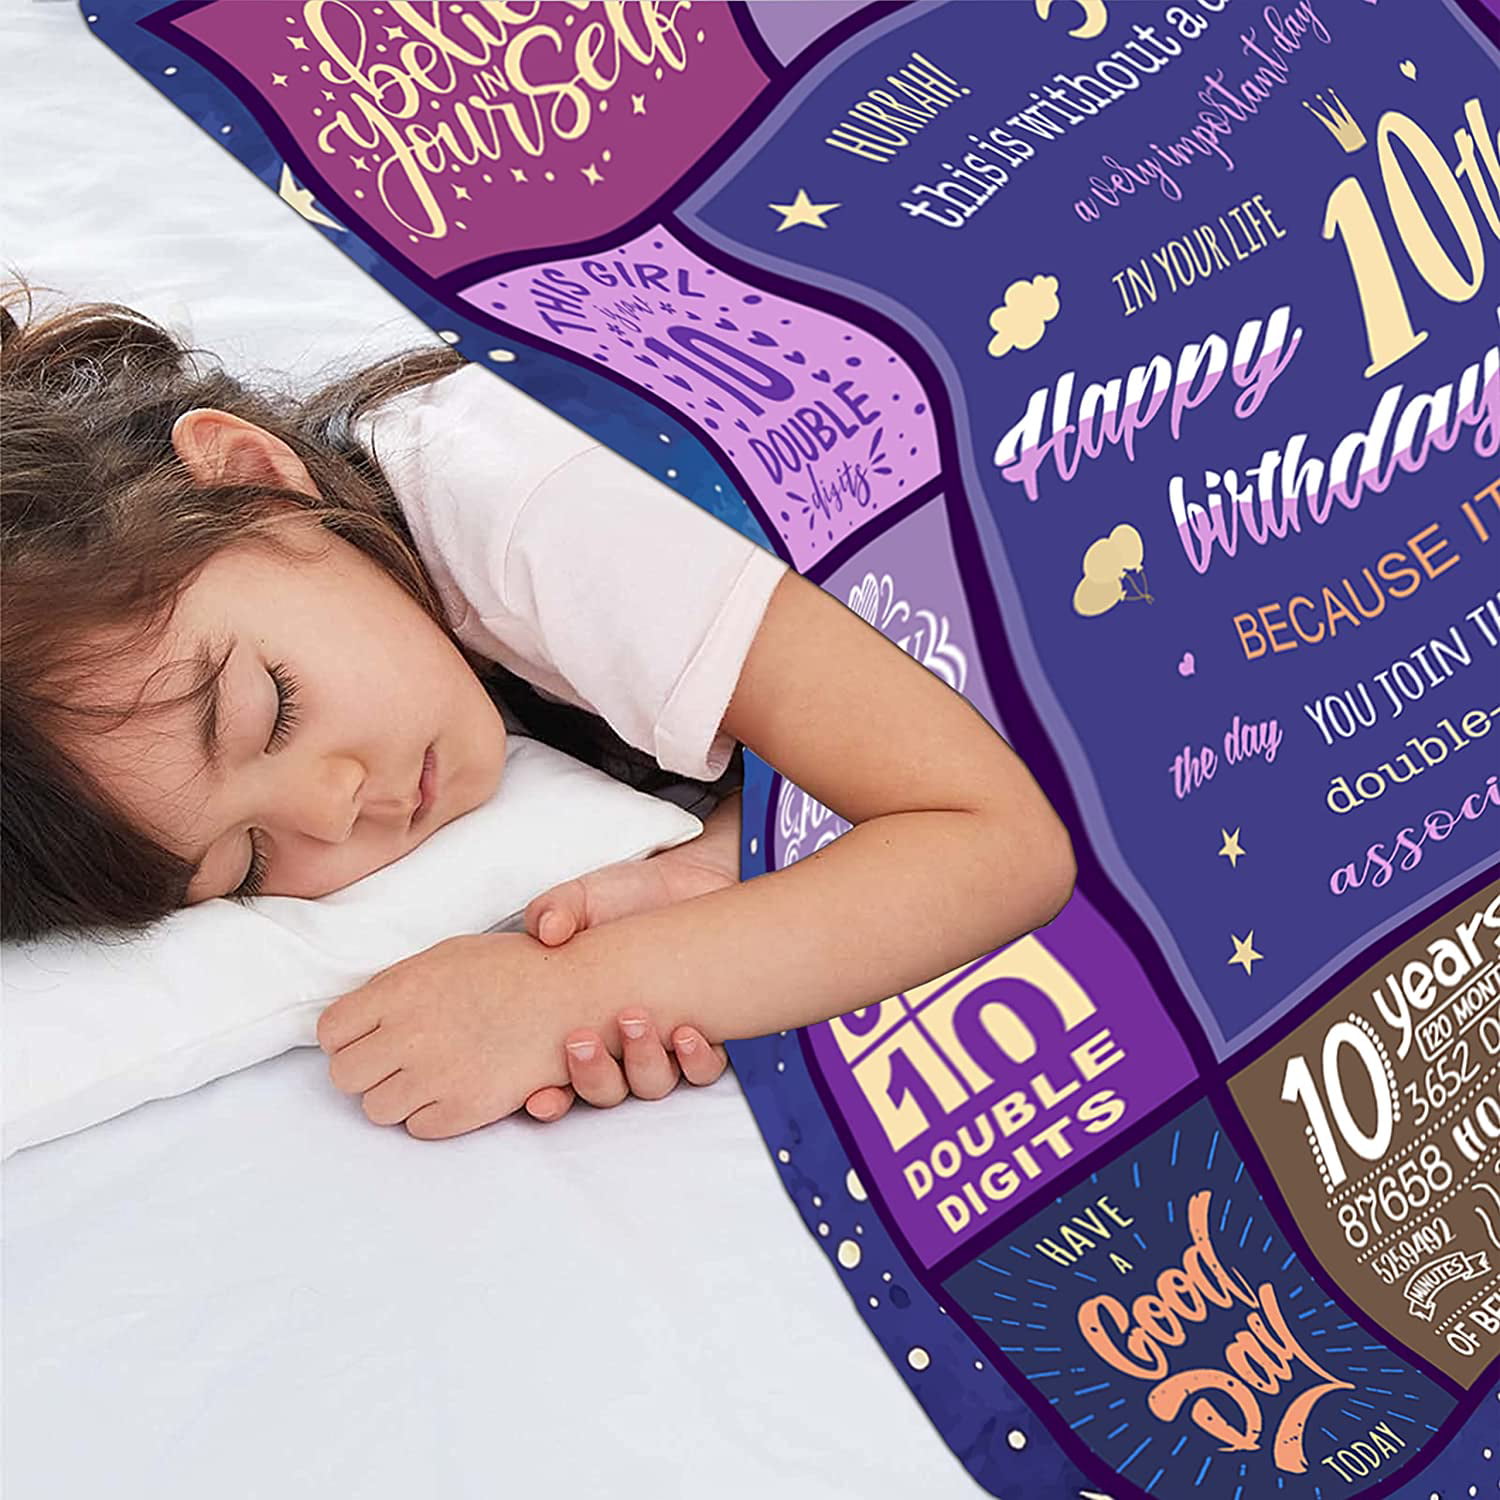  Pozevan 13 Year Old Girl Gift Ideas, Gifts for 13 Year Old  Girl, 13th Birthday Gifts, Best Gifts for 13 Year Old Girl, 13th Birthday  Decorations Blanket 50X60 : Home & Kitchen